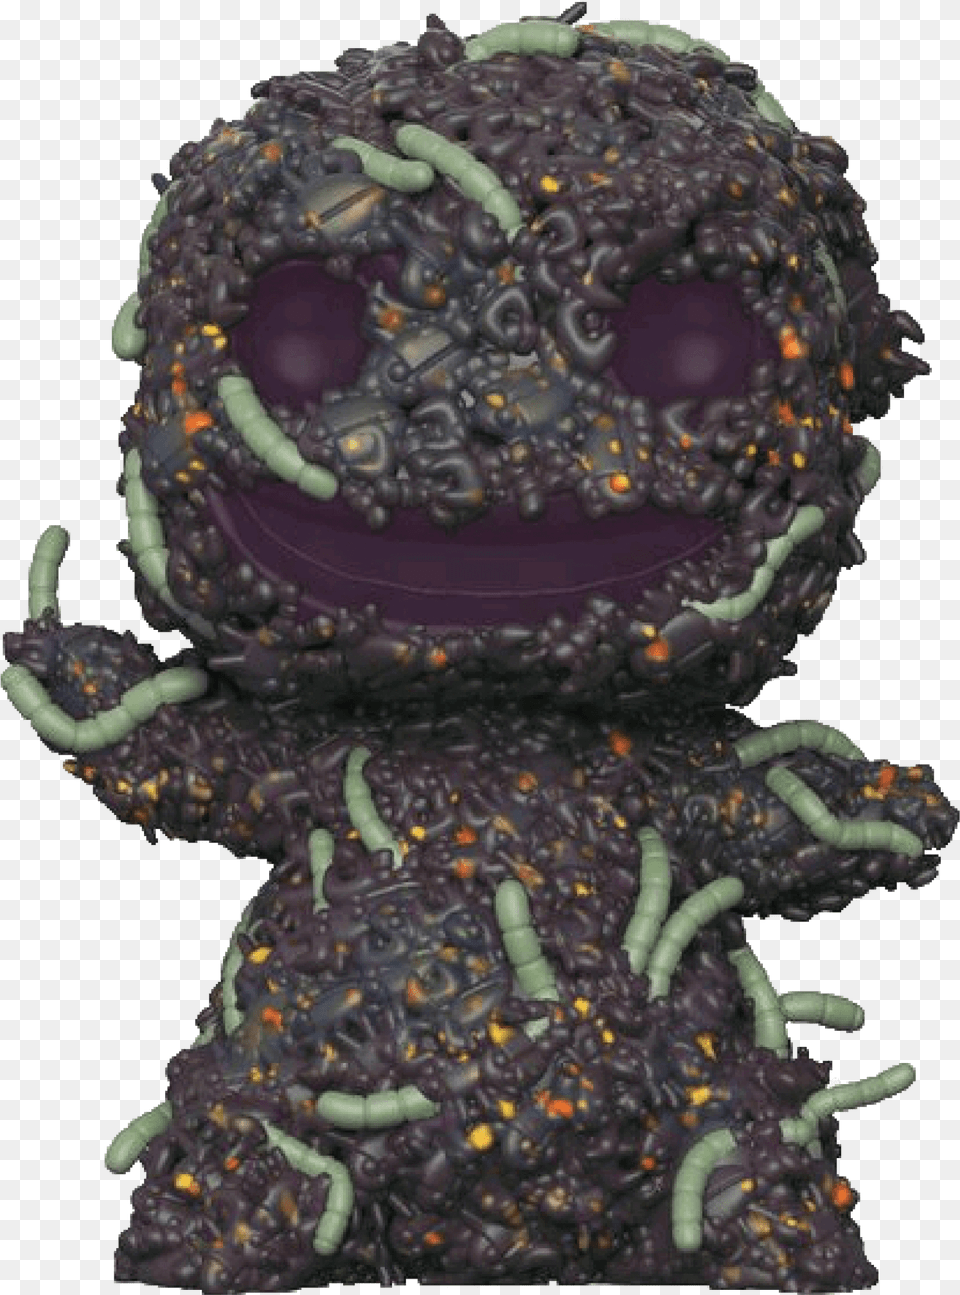 Funko Pop Oogie Boogie With Bugs, Birthday Cake, Cake, Cream, Dessert Free Png Download